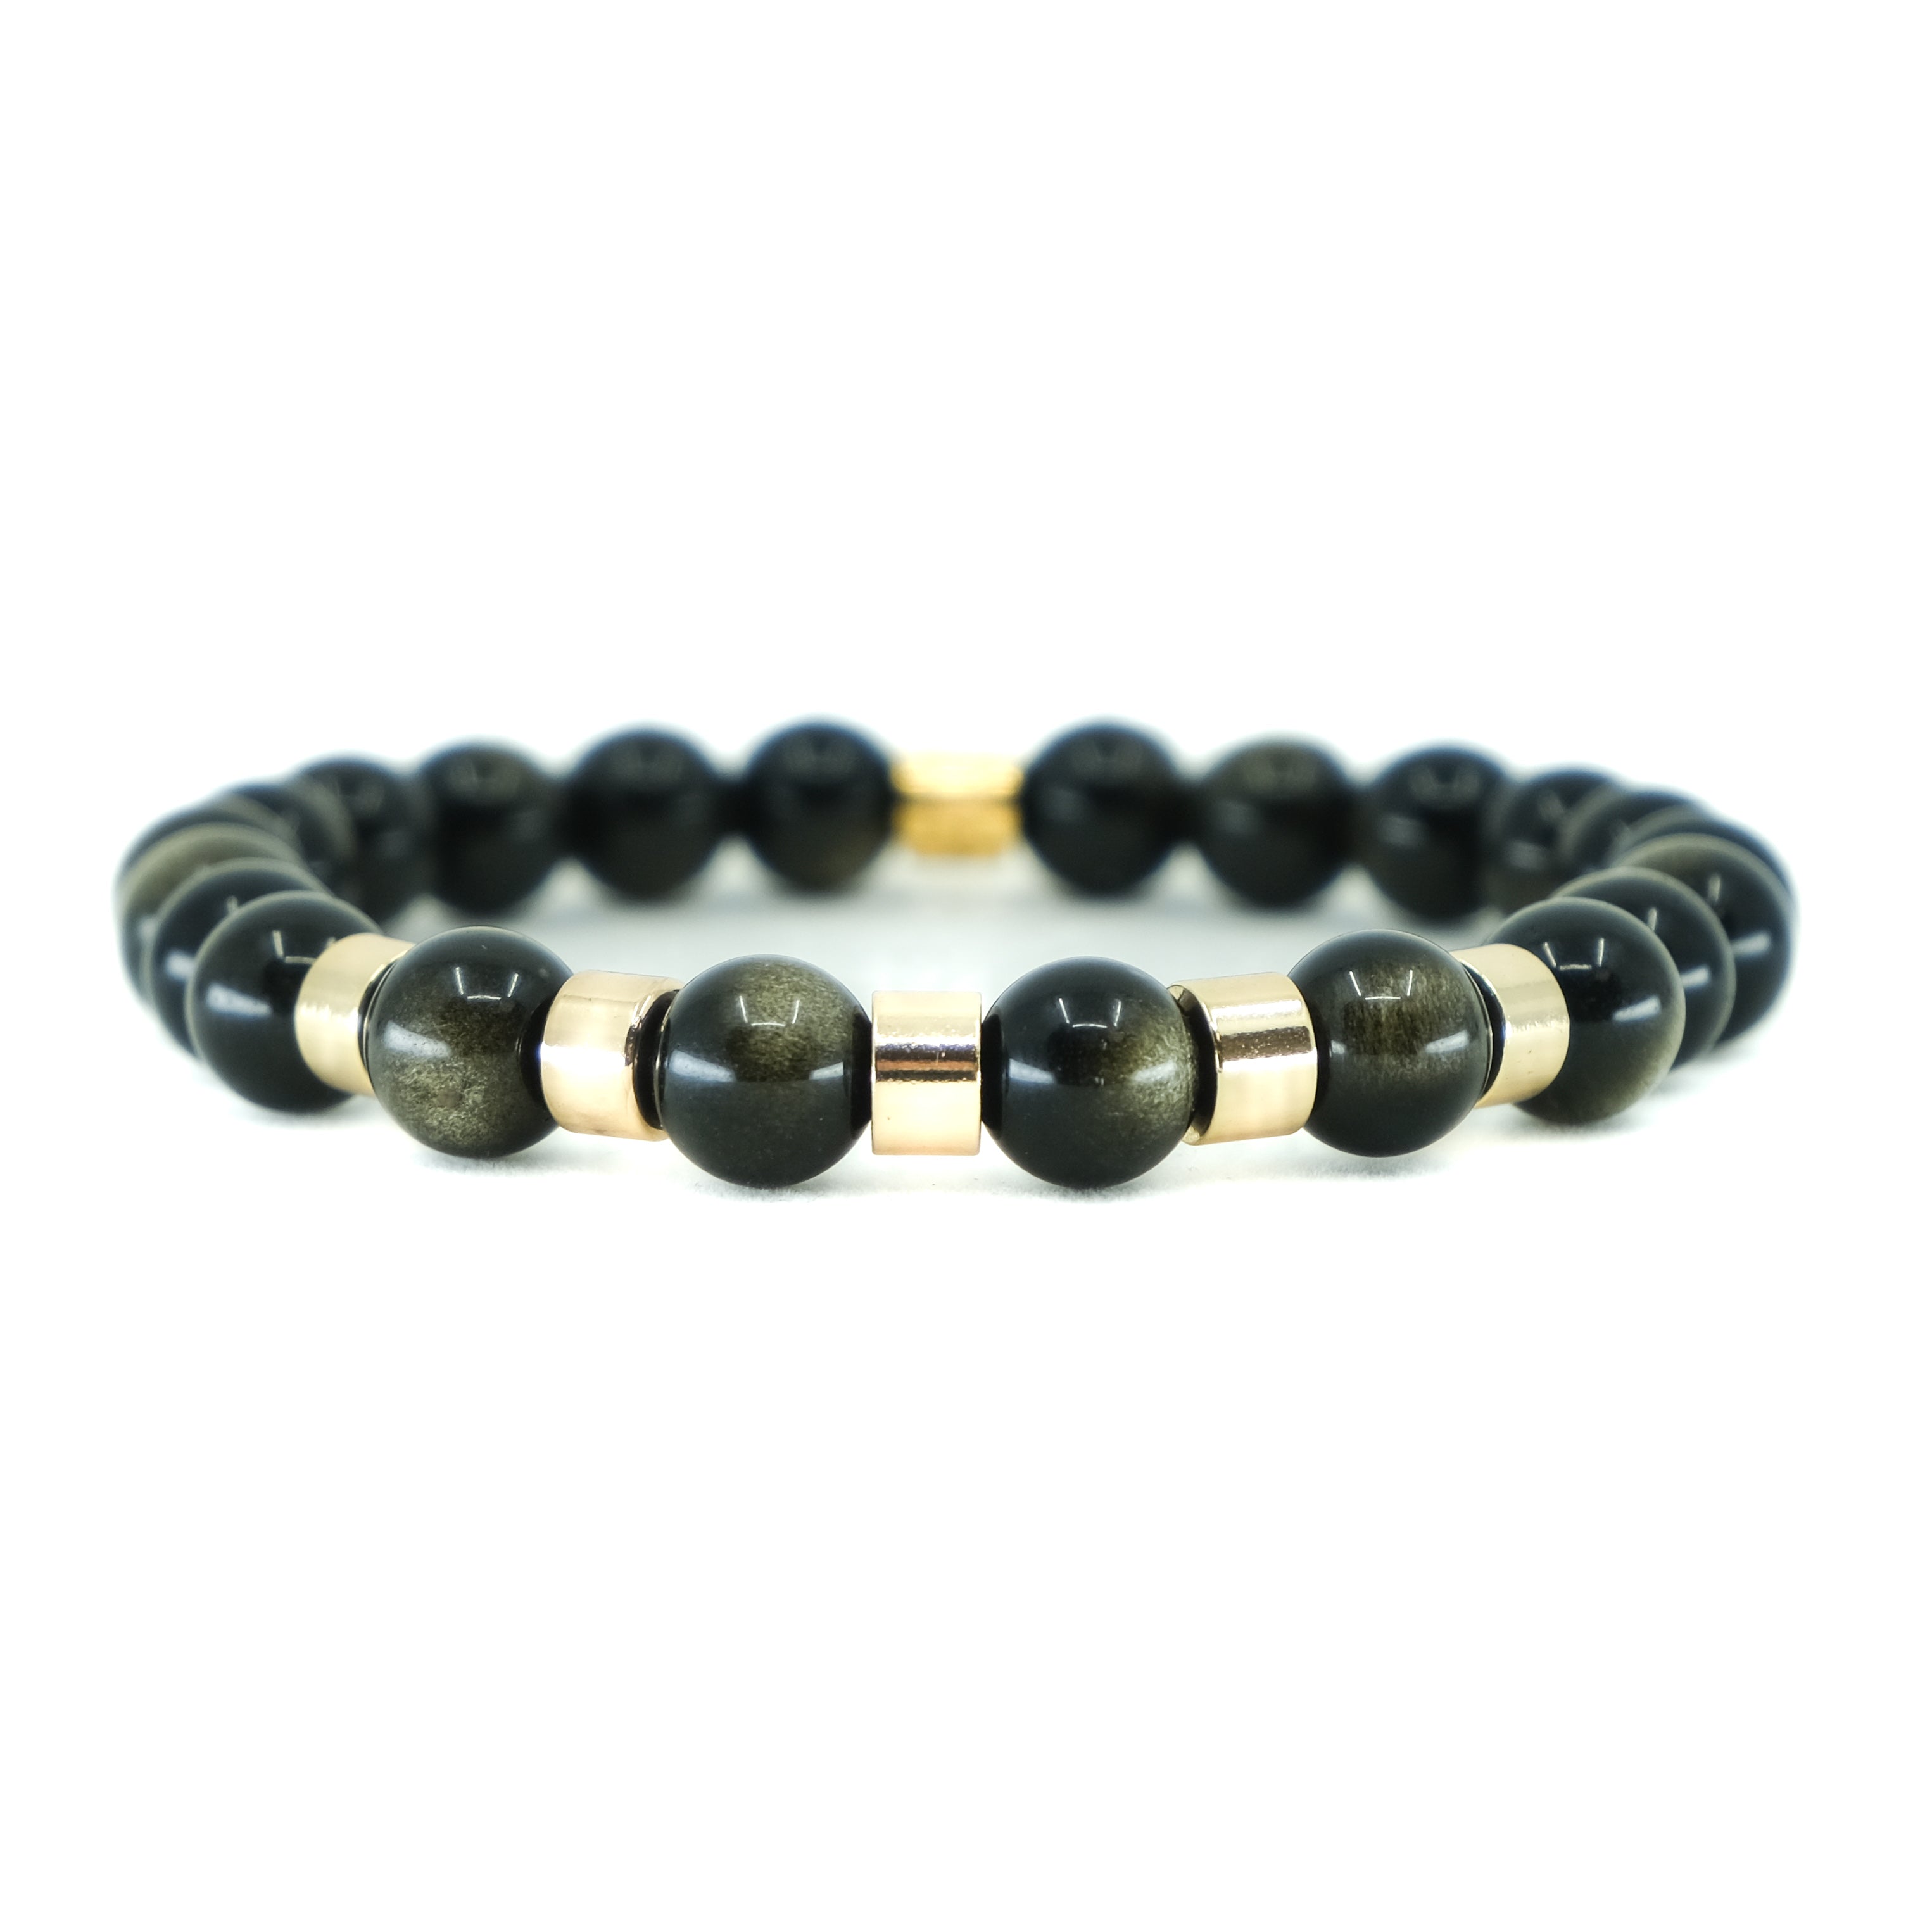 A golden obsidian gemstone bracelet with gold accessories